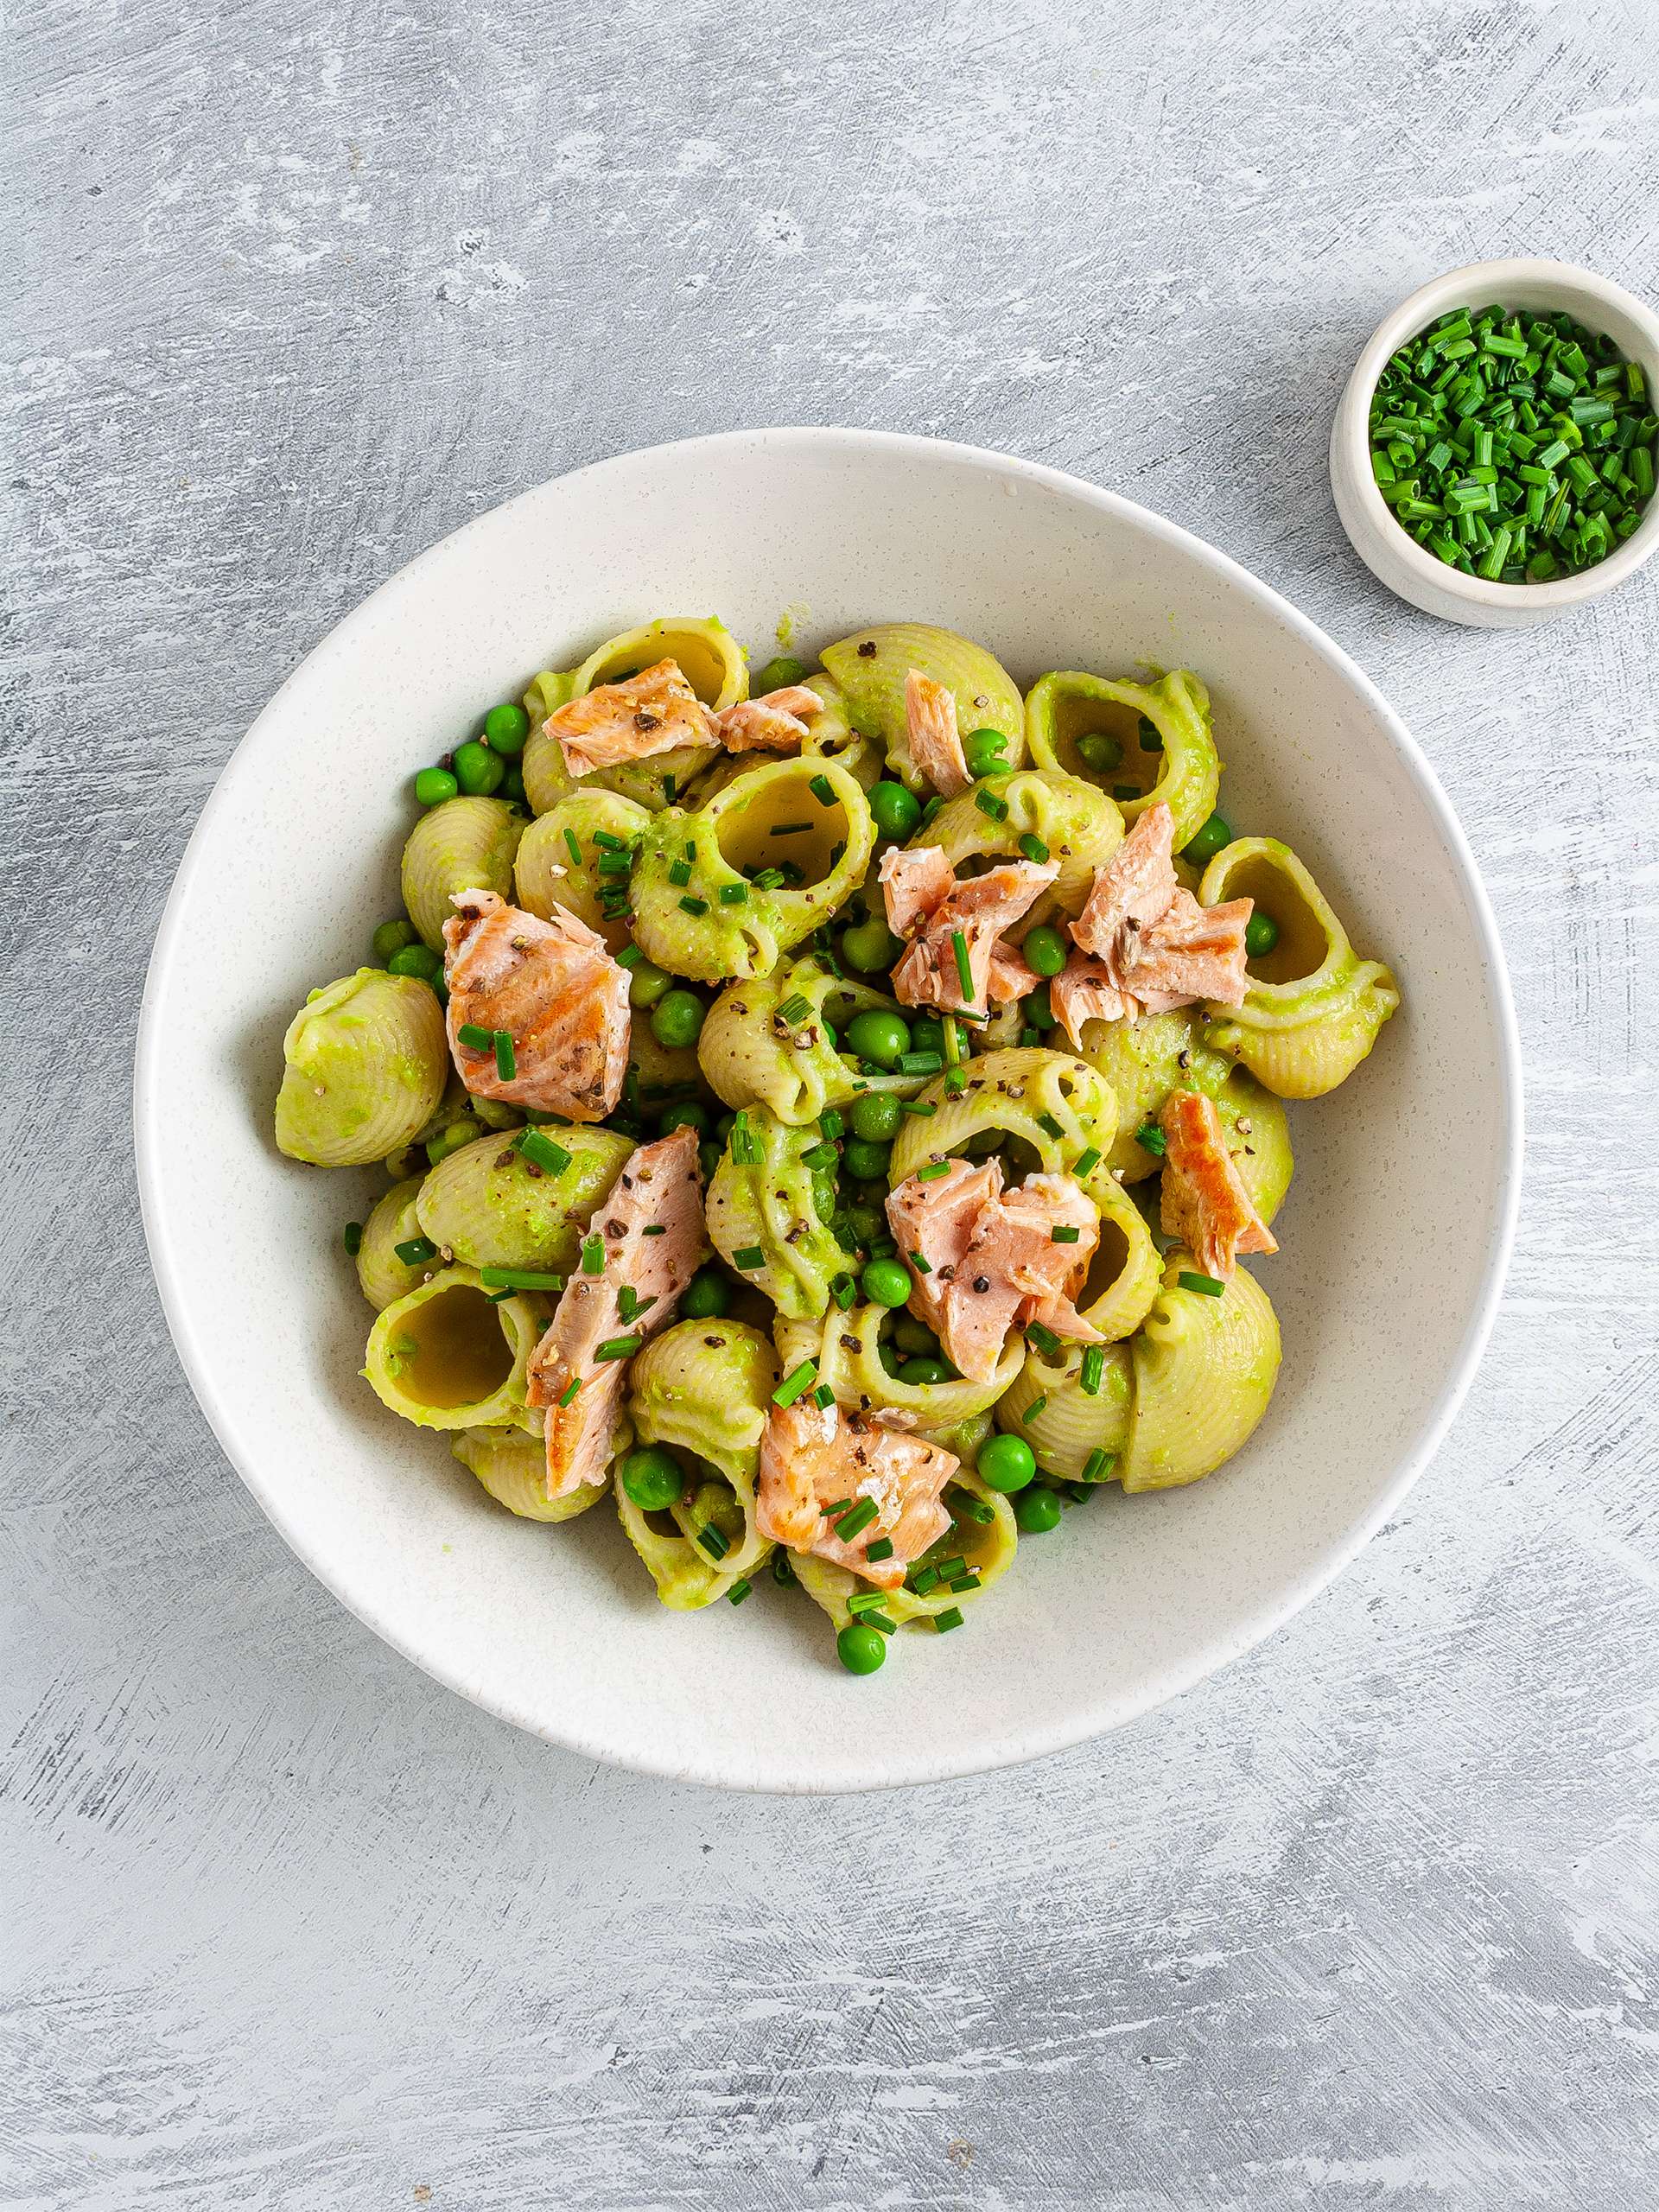 Salmon pasta salad with peas in a bowl